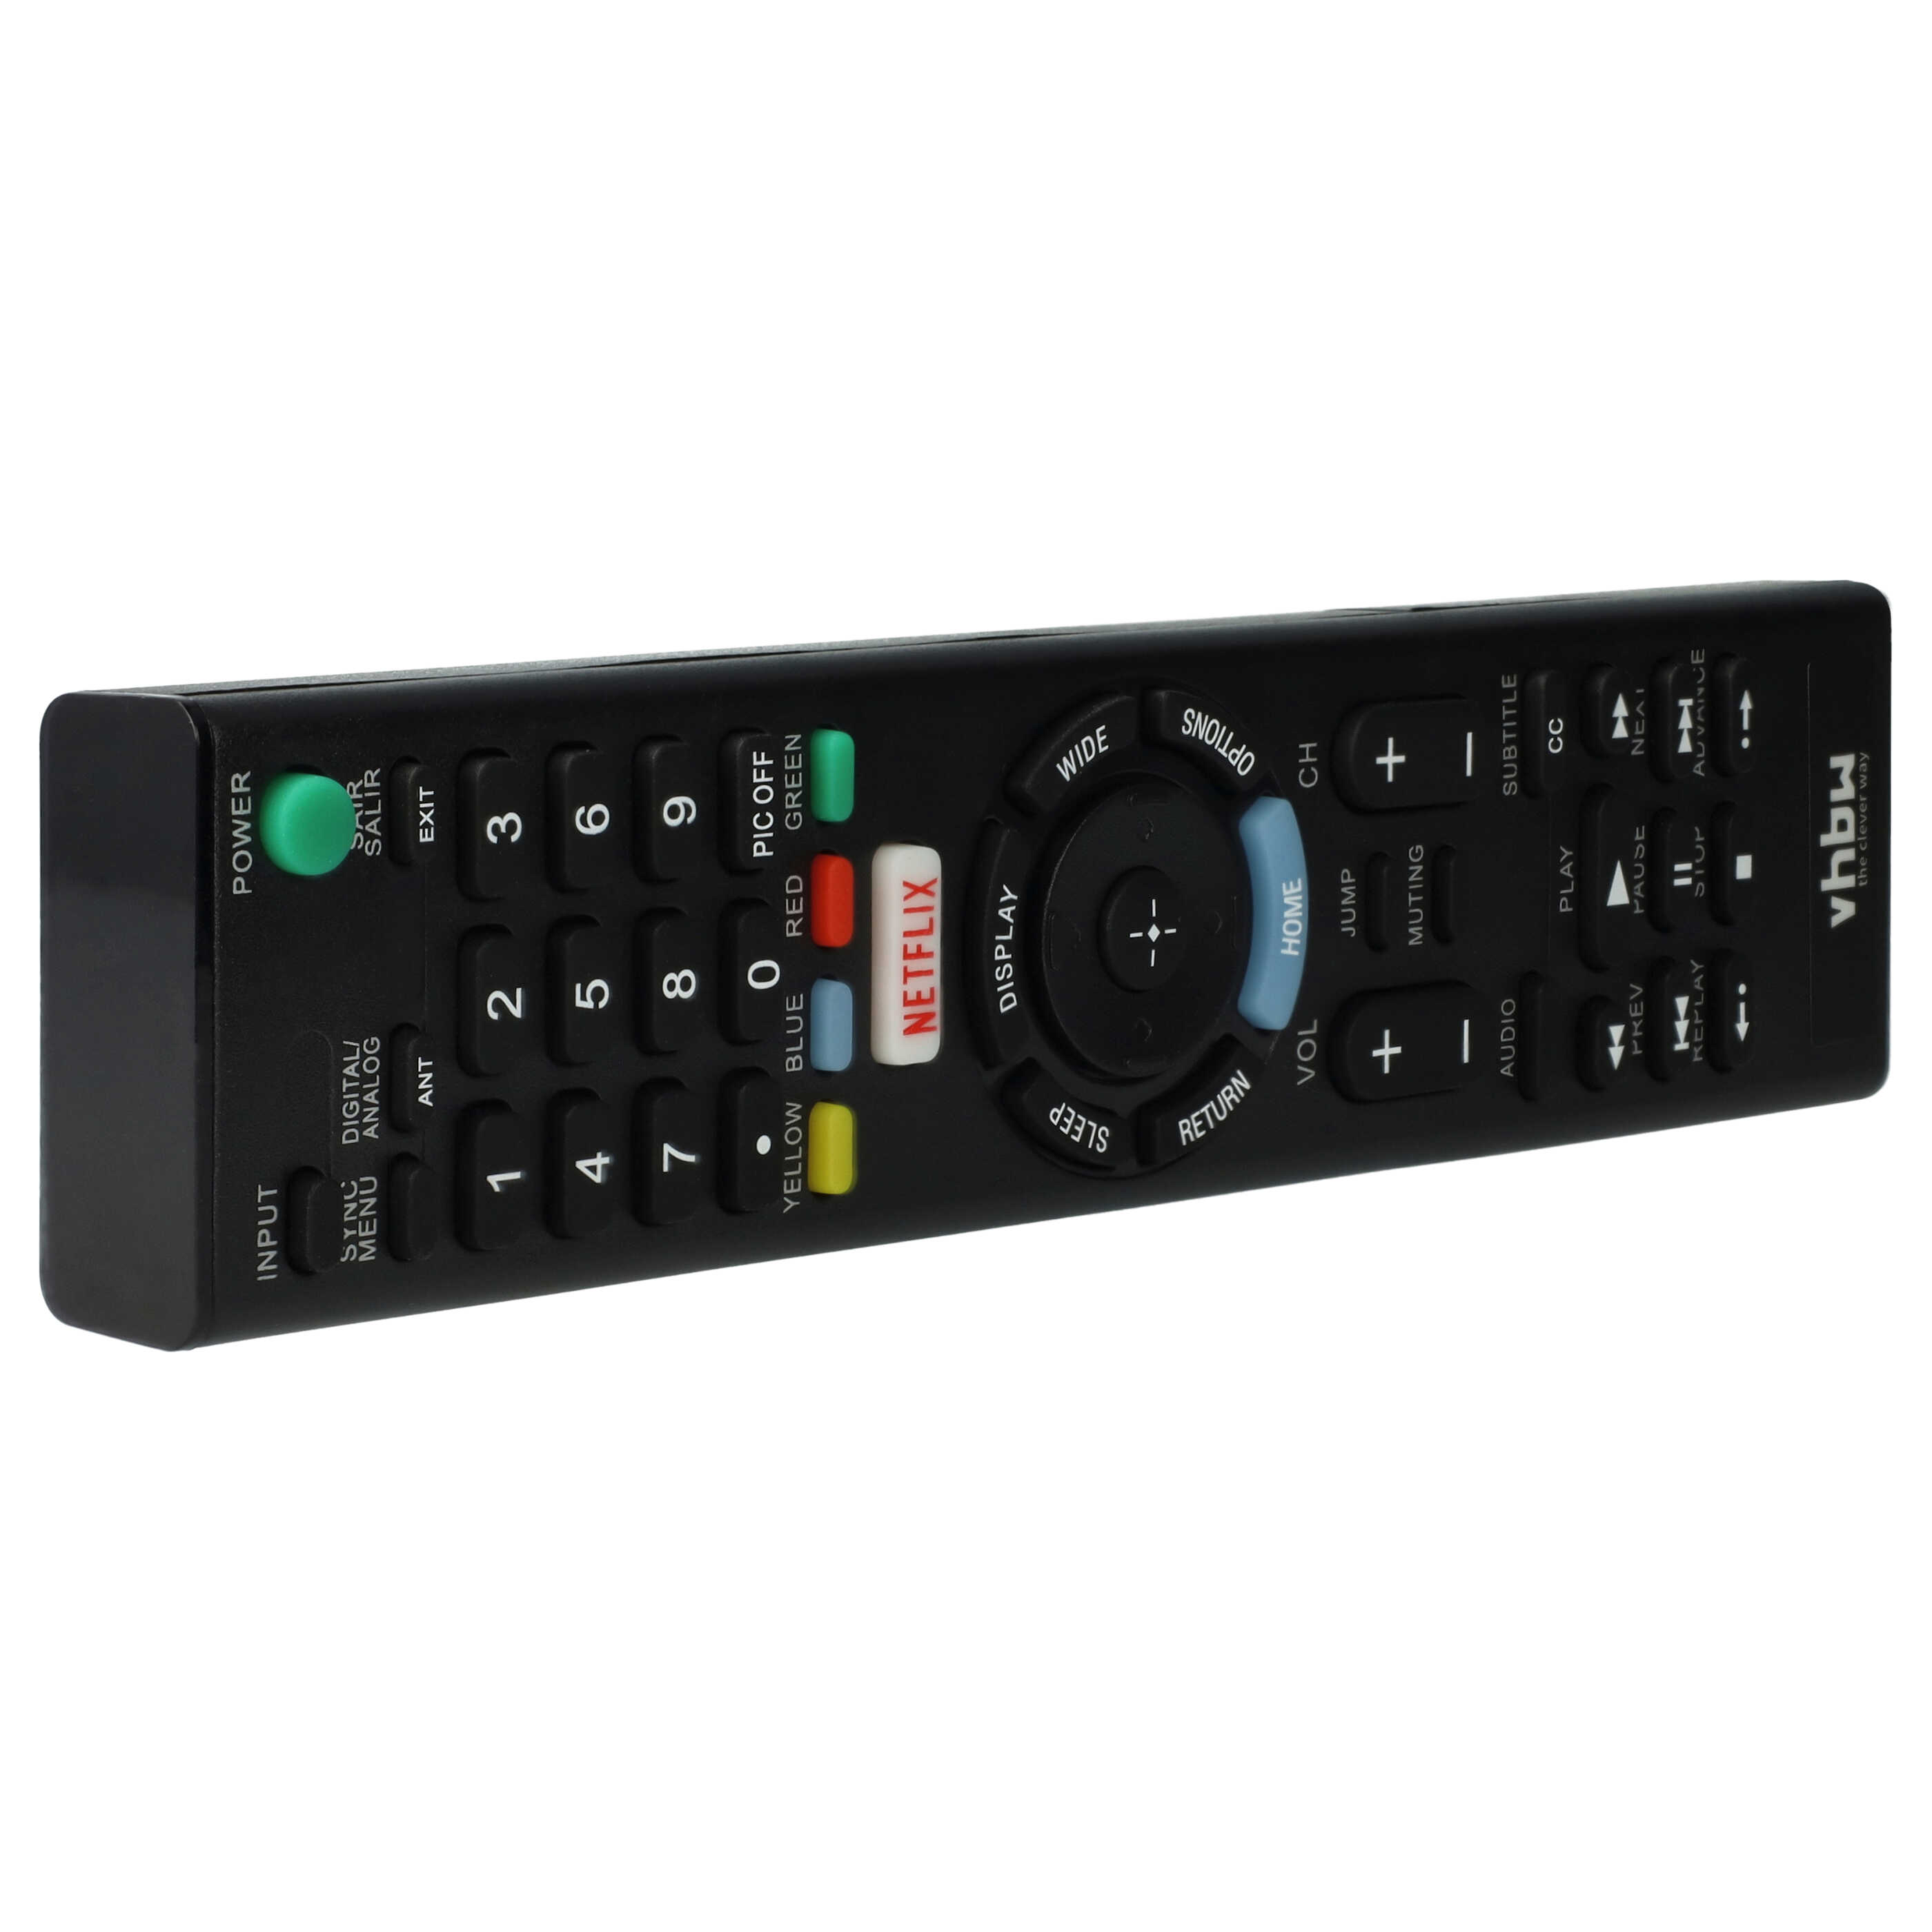 Remote Control replaces Sony RMT-TX102U for Sony TV